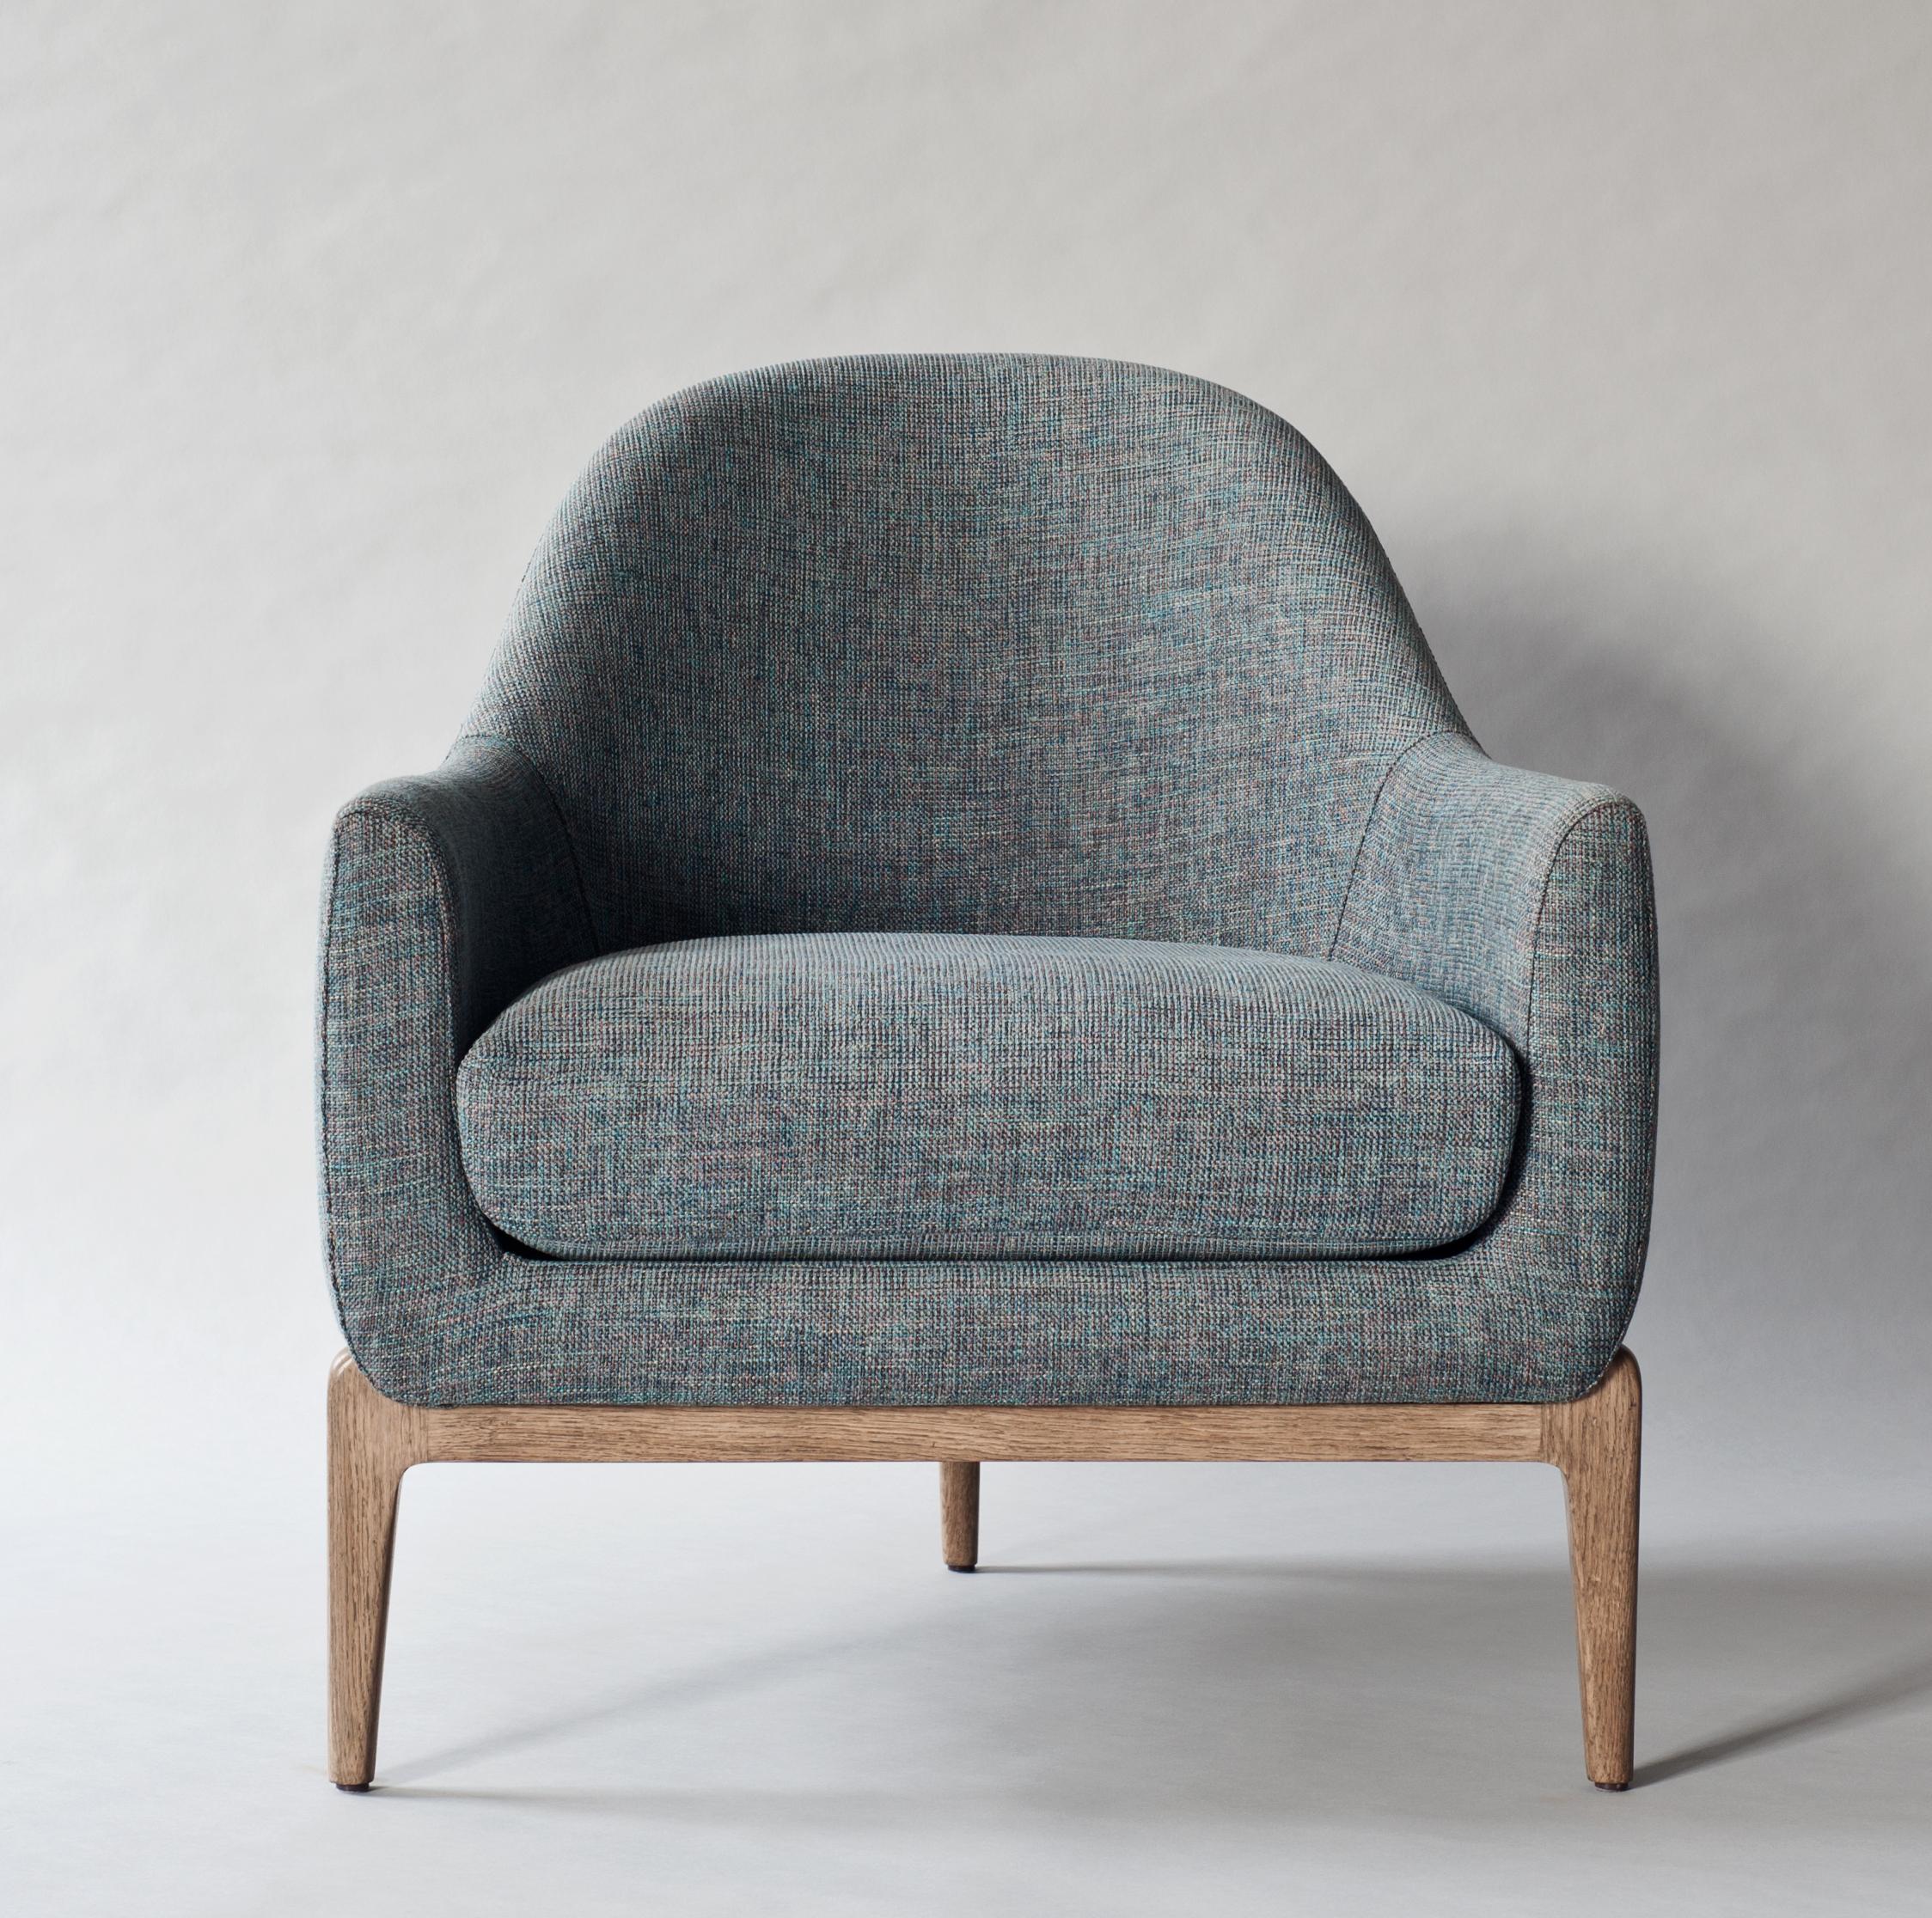 In the Treble Side Chair, a gently curved back gives way to streamlined armrests, embracing the body and framing a loose seat cushion. The fully upholstered form rests atop a tripod base of hand-crafted solid oak, with tapered legs that mirror the